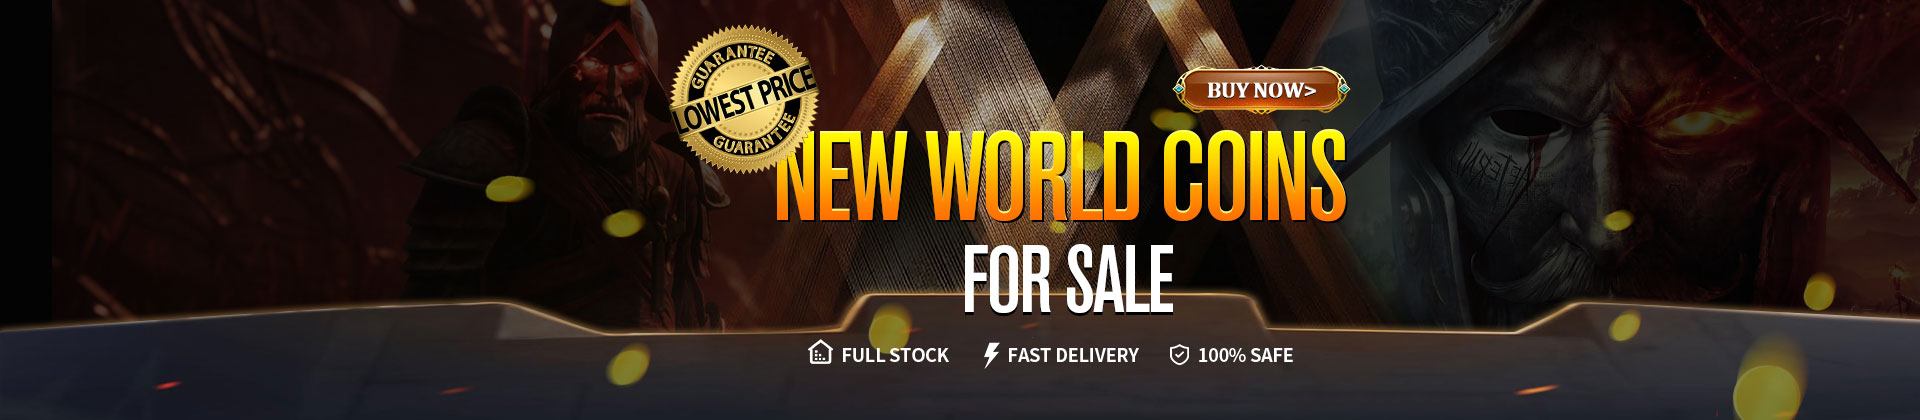 Buy New World Coins